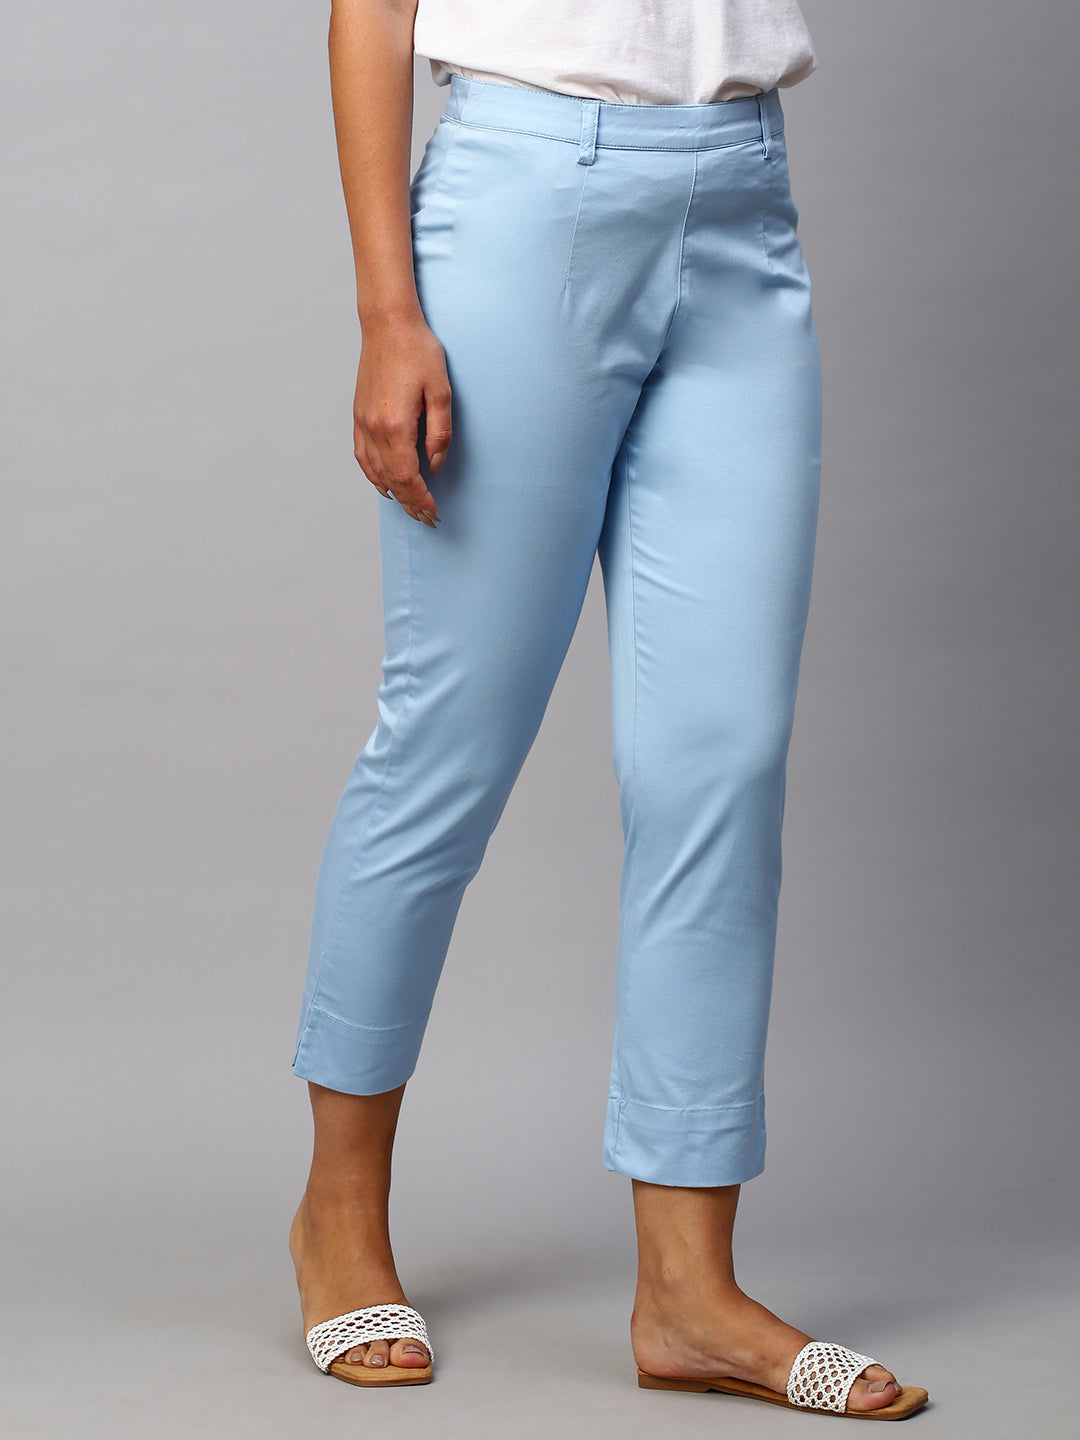 Buy Womens Regular Casual Pants TRSTealBlue2XLTeal Blue at Amazonin